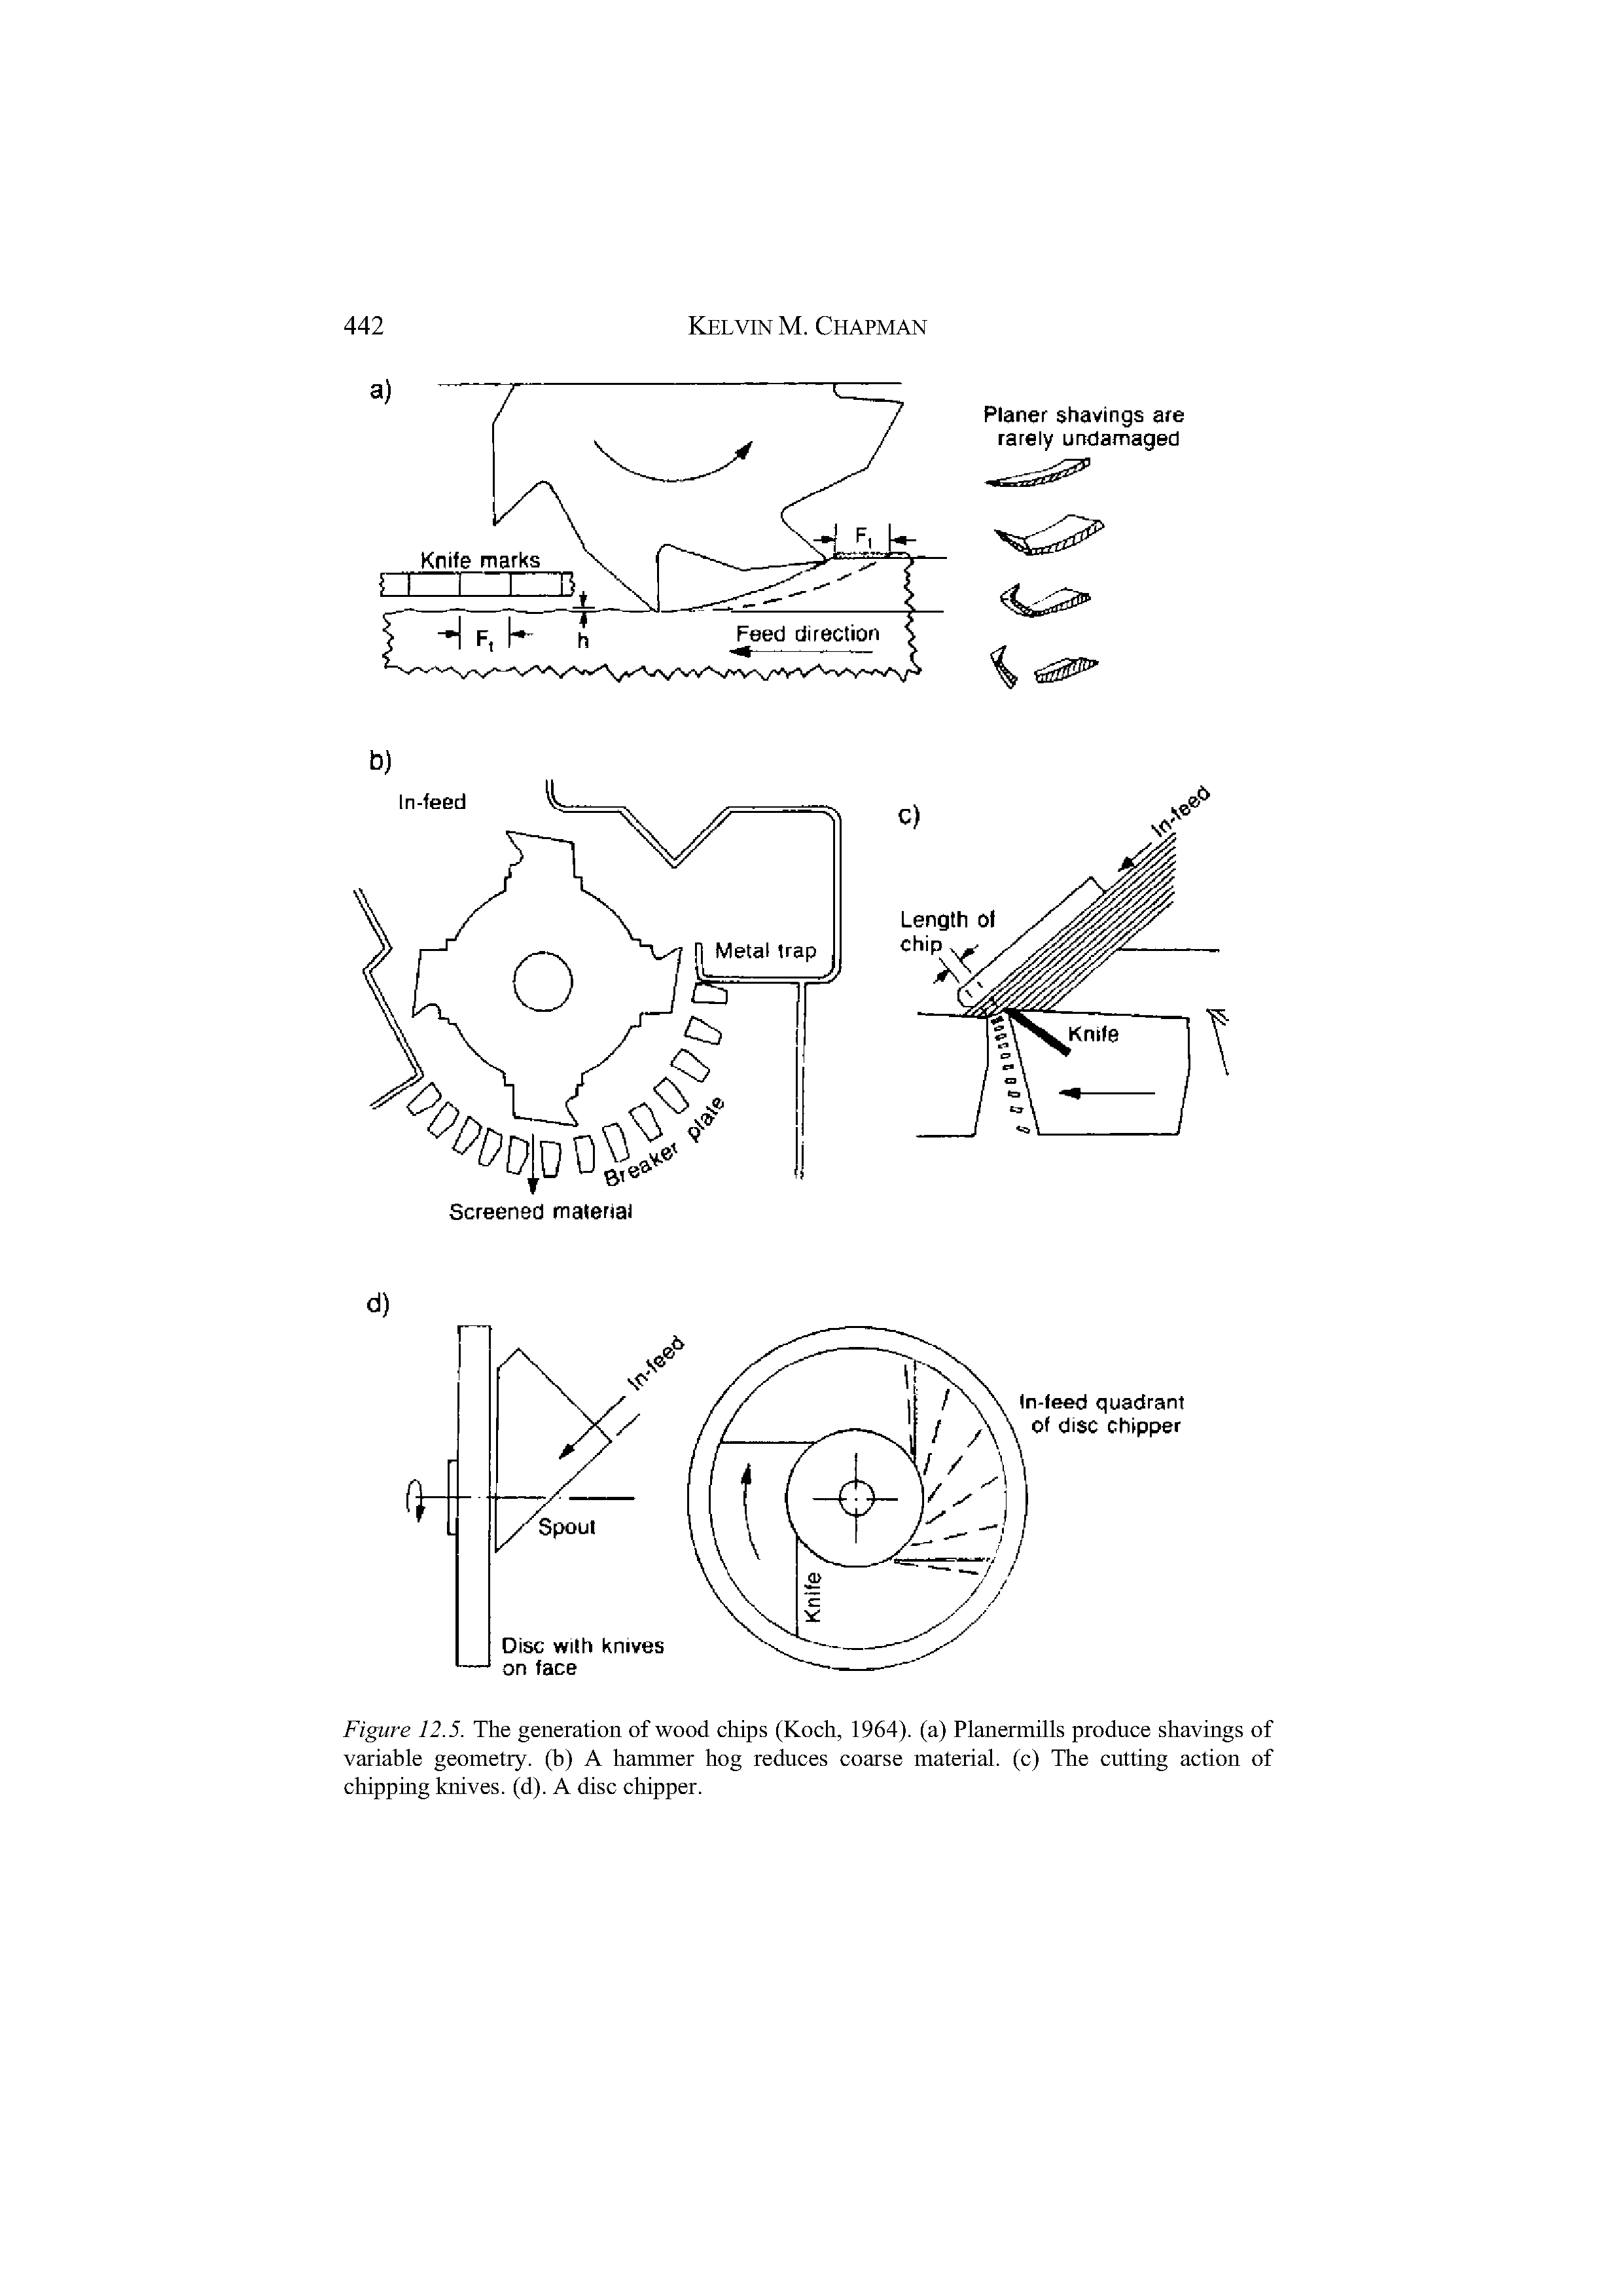 Figure 12.5. The generation of wood chips (Koch, 1964). (a) Planermills produce shavings of variable geometry, (b) A hammer hog reduces coarse material, (c) The cutting action of chipping knives, (d). A disc chipper.